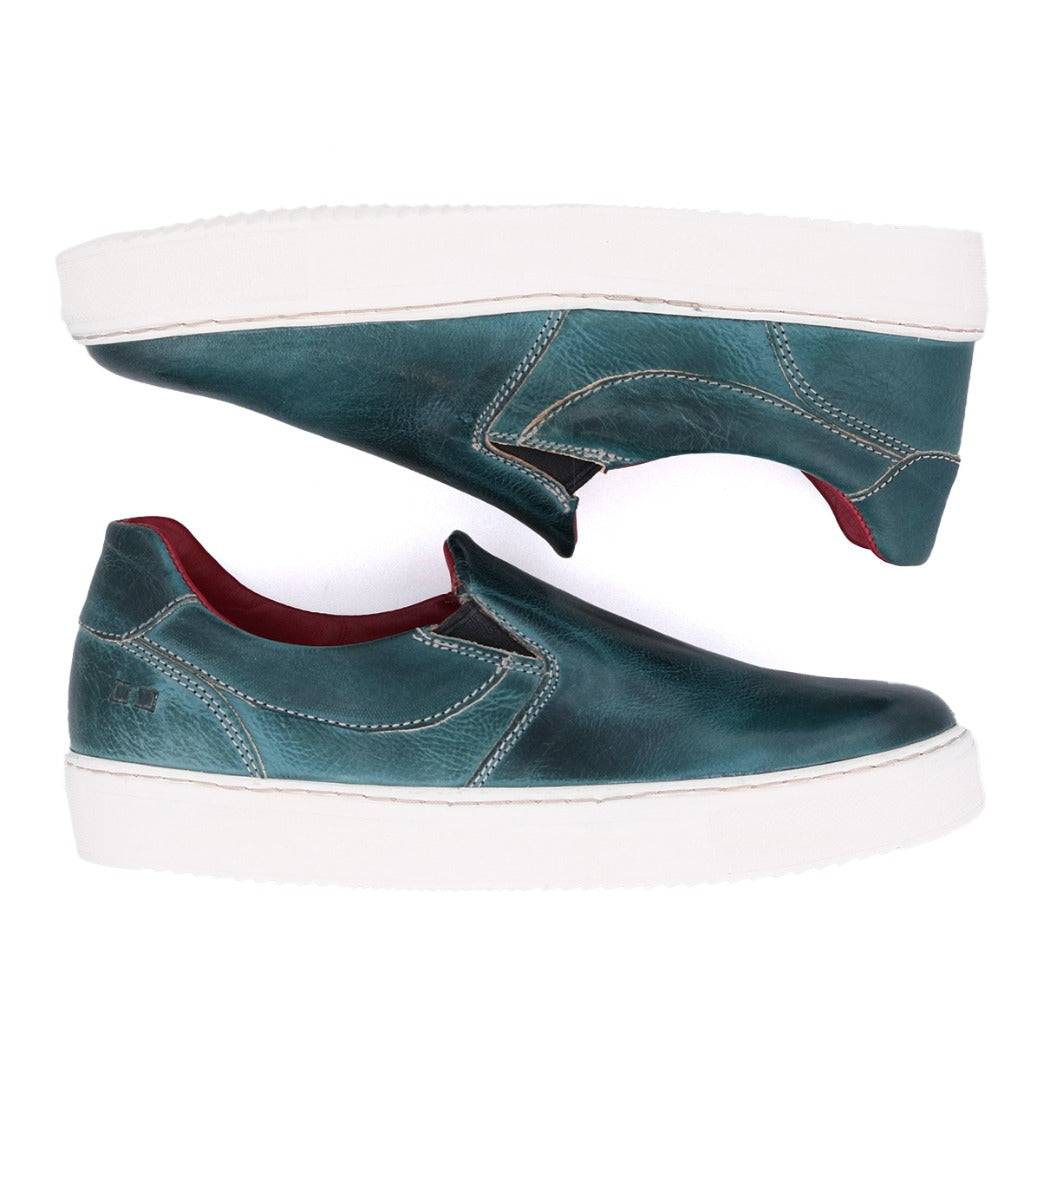 A pair of Hermione green leather slip on sneakers from Bed Stu.